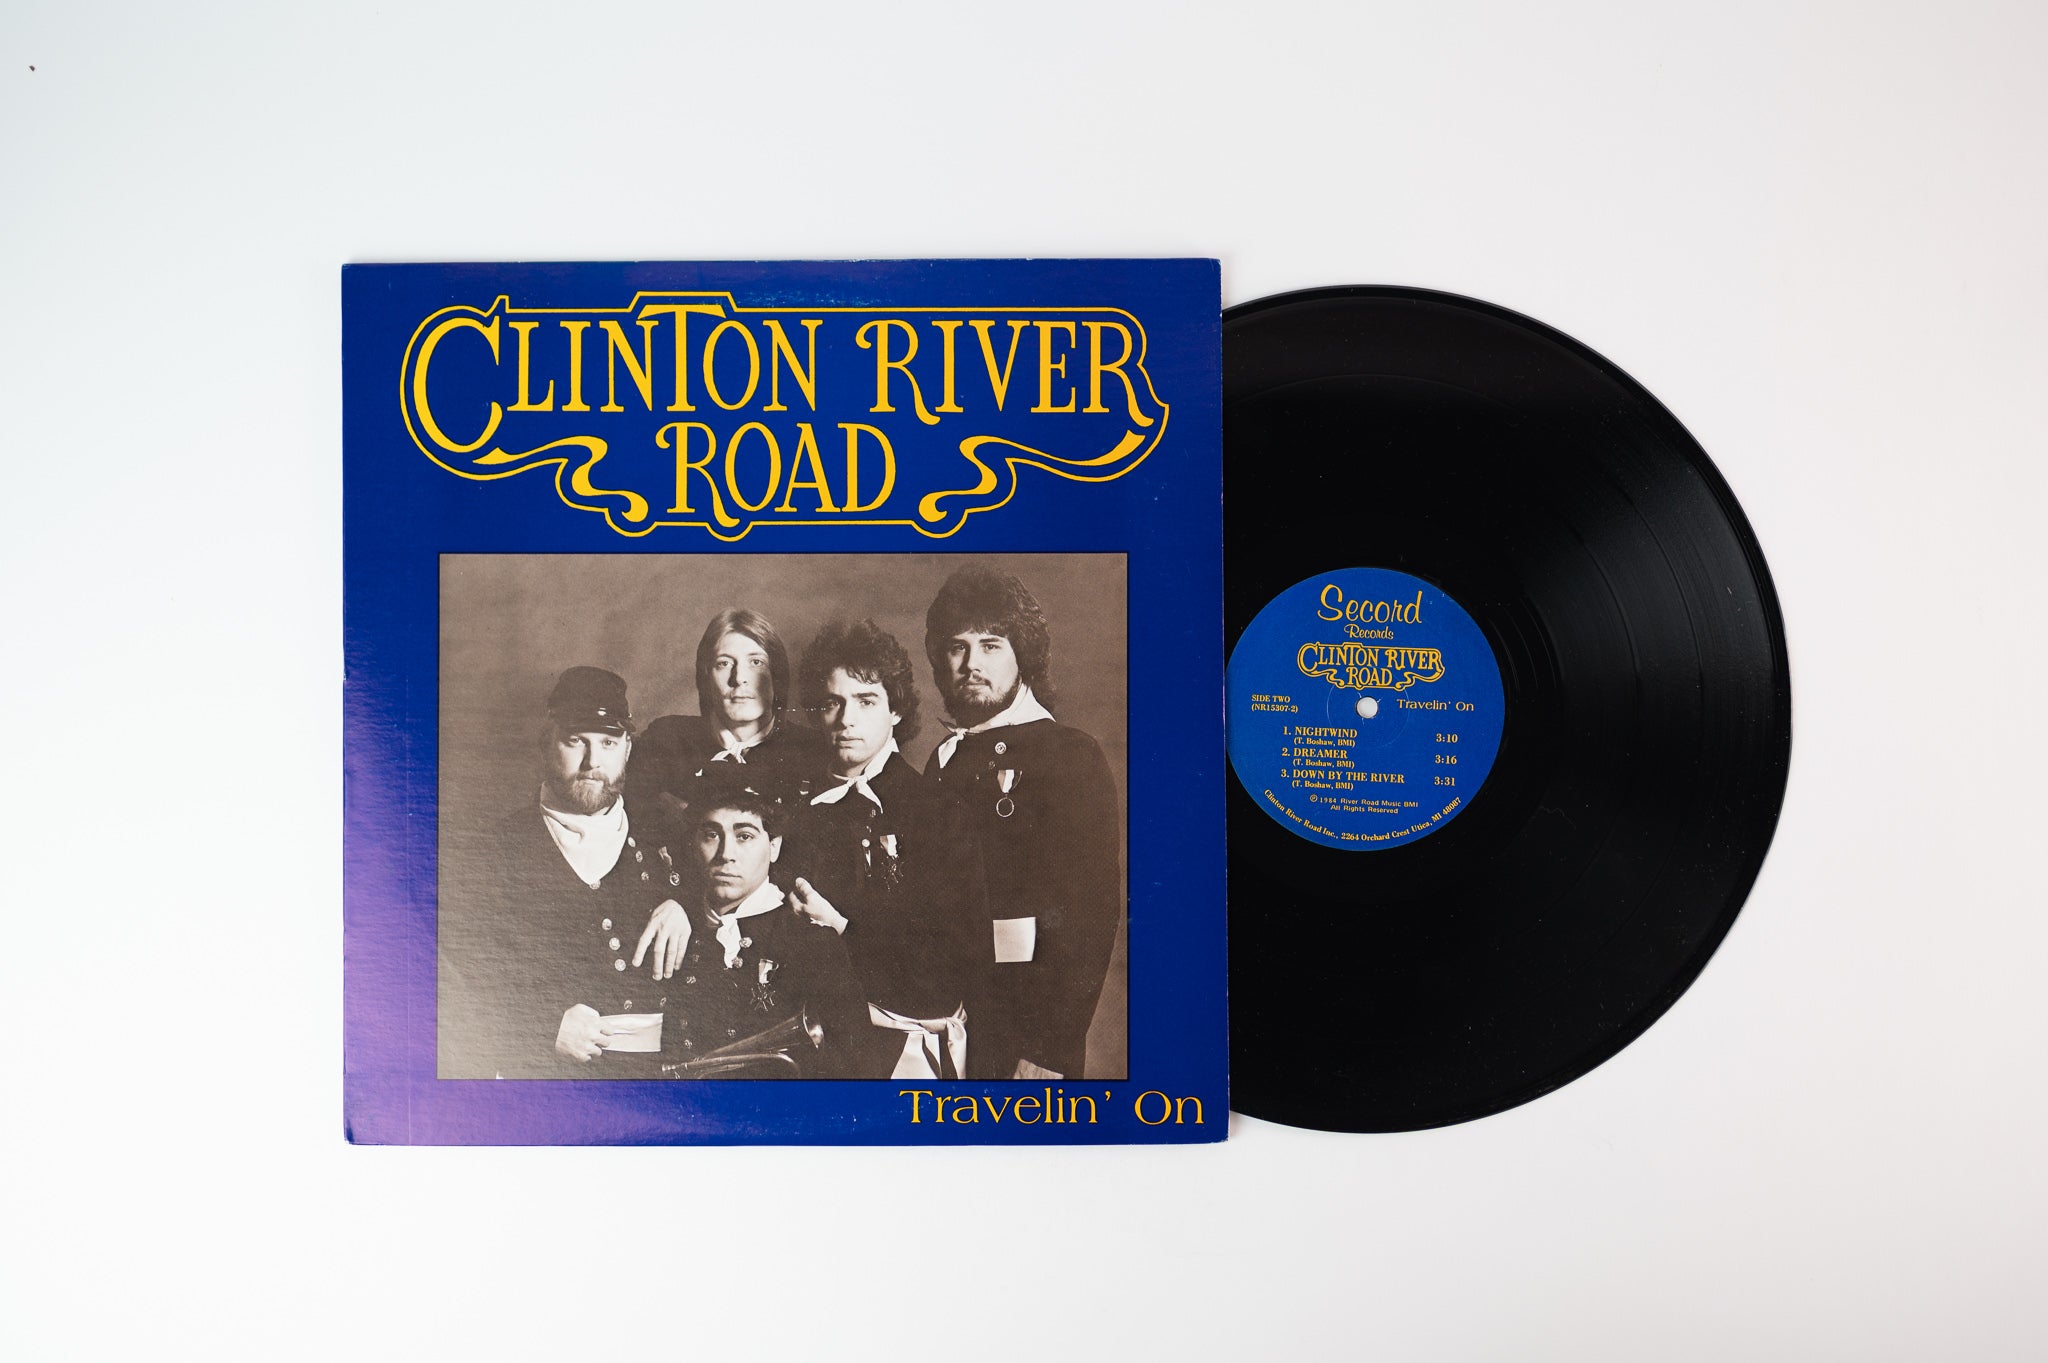 Clinton River Road - Travelin' on on Second Records Private press